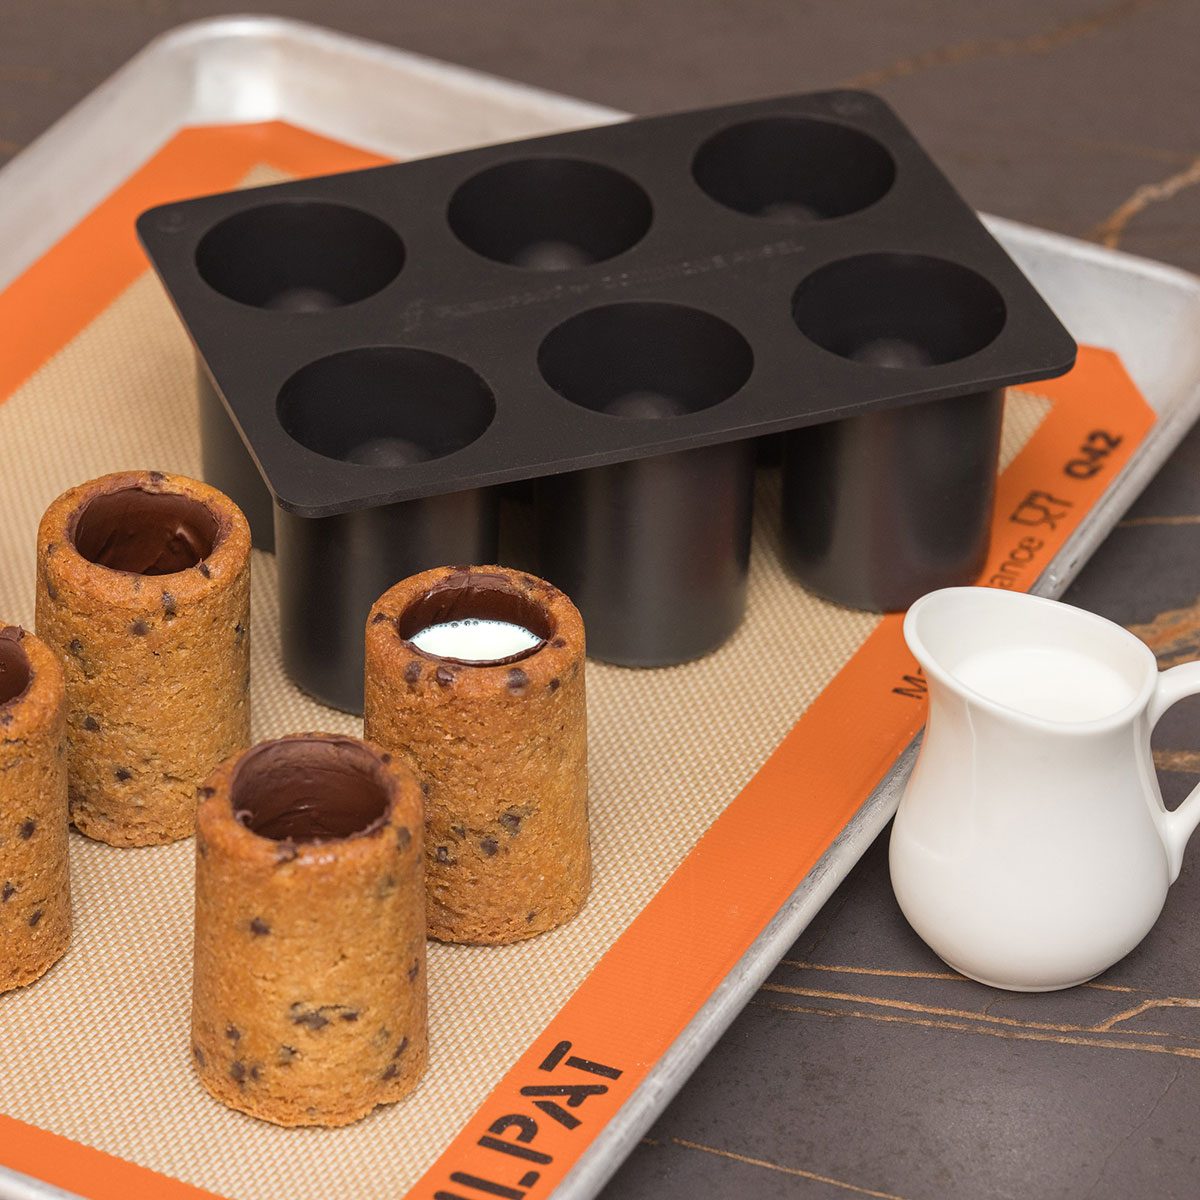 38+ Best Creative Gifts for Bakers for 2023